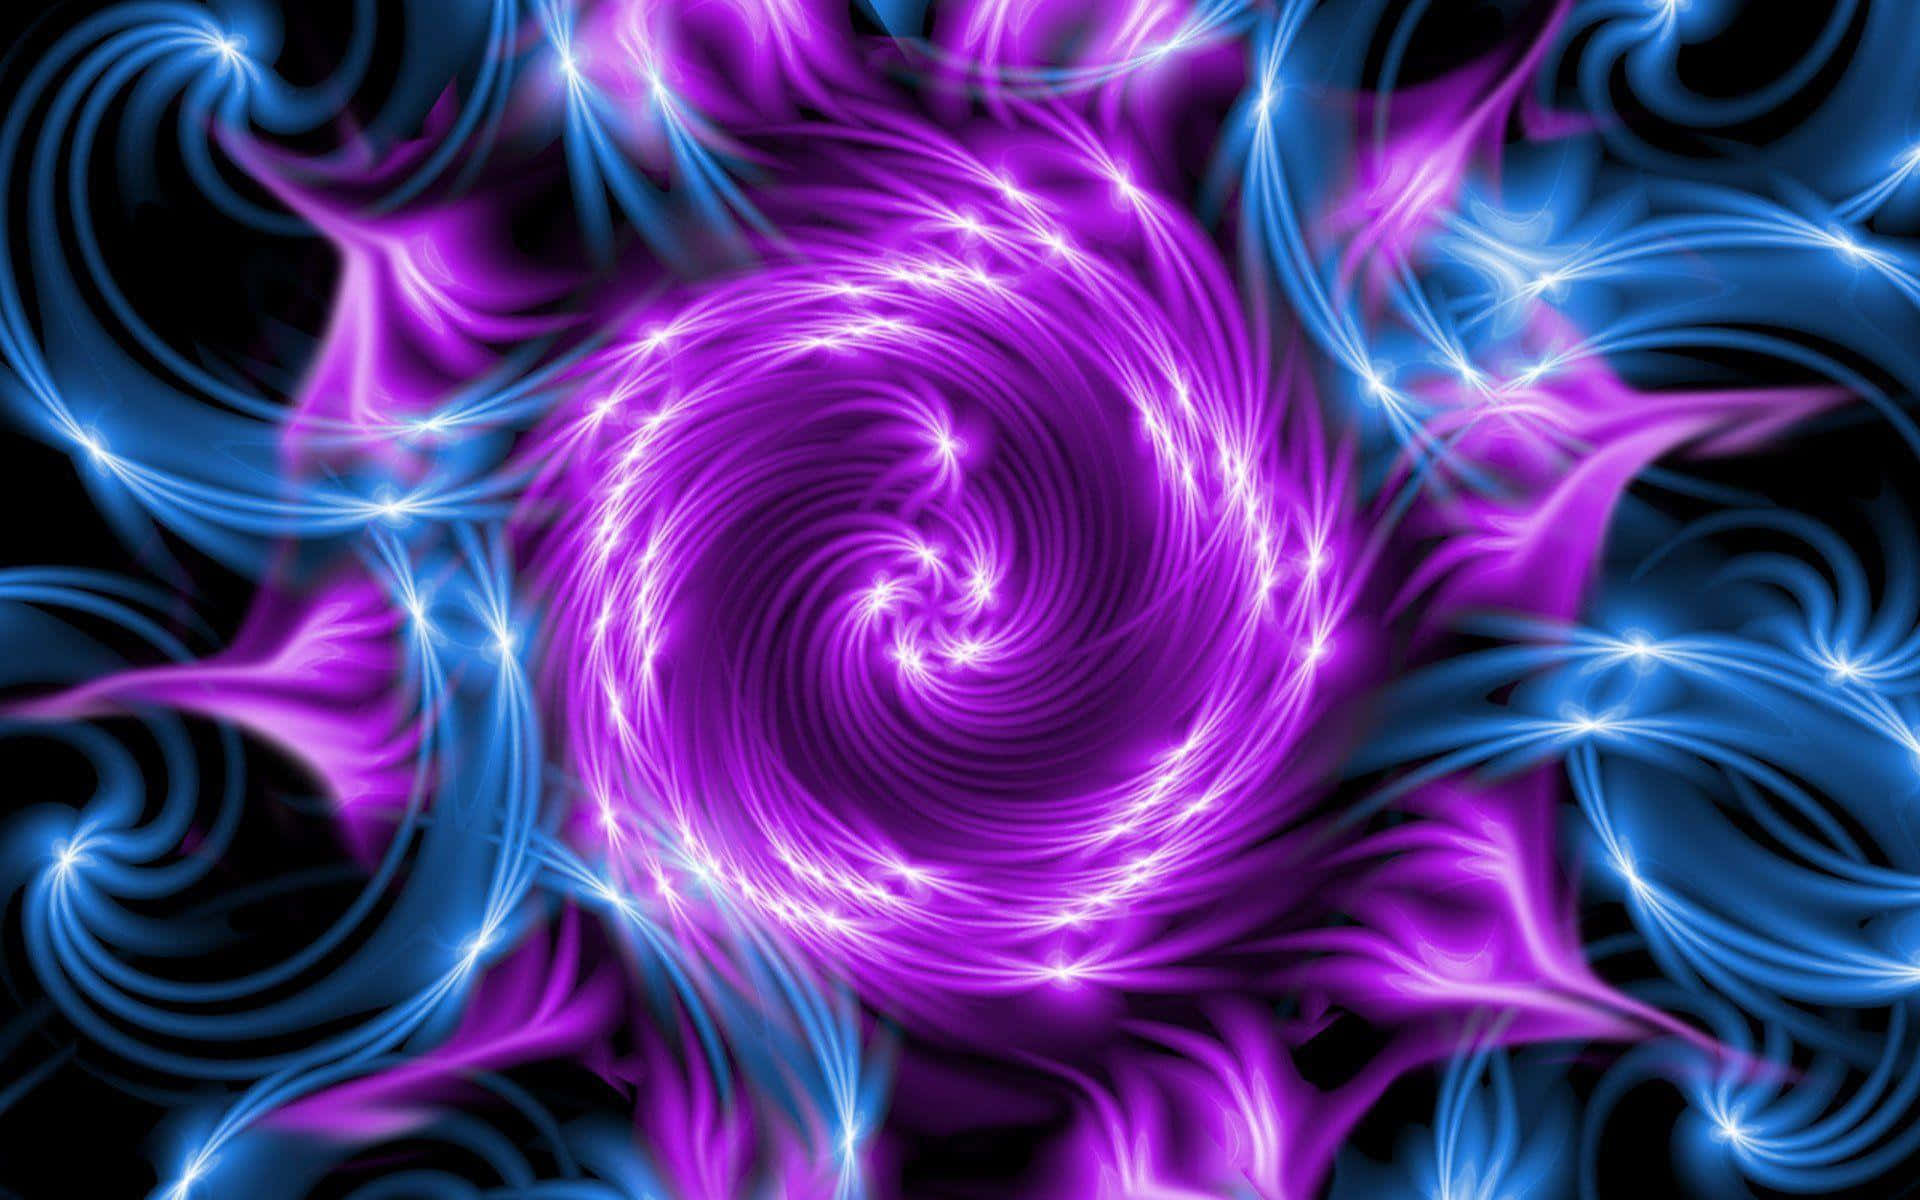 Purple And Blue Swirling Spiral Background